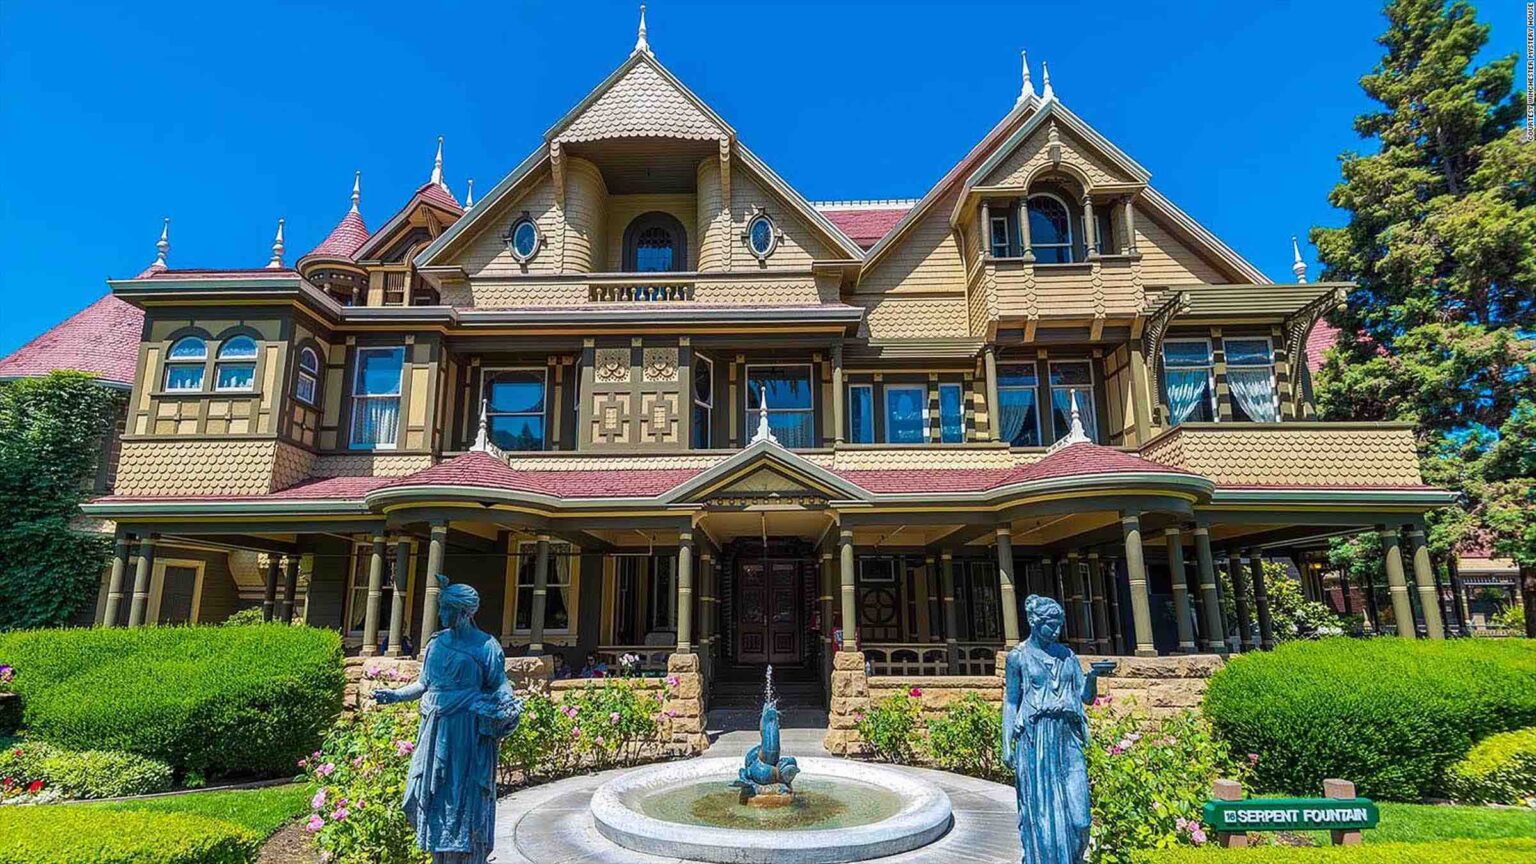 For those of you unfamiliar with the lore behind the Winchester Mystery House, then let’s tell you a story about the tragedy in the original haunted house.